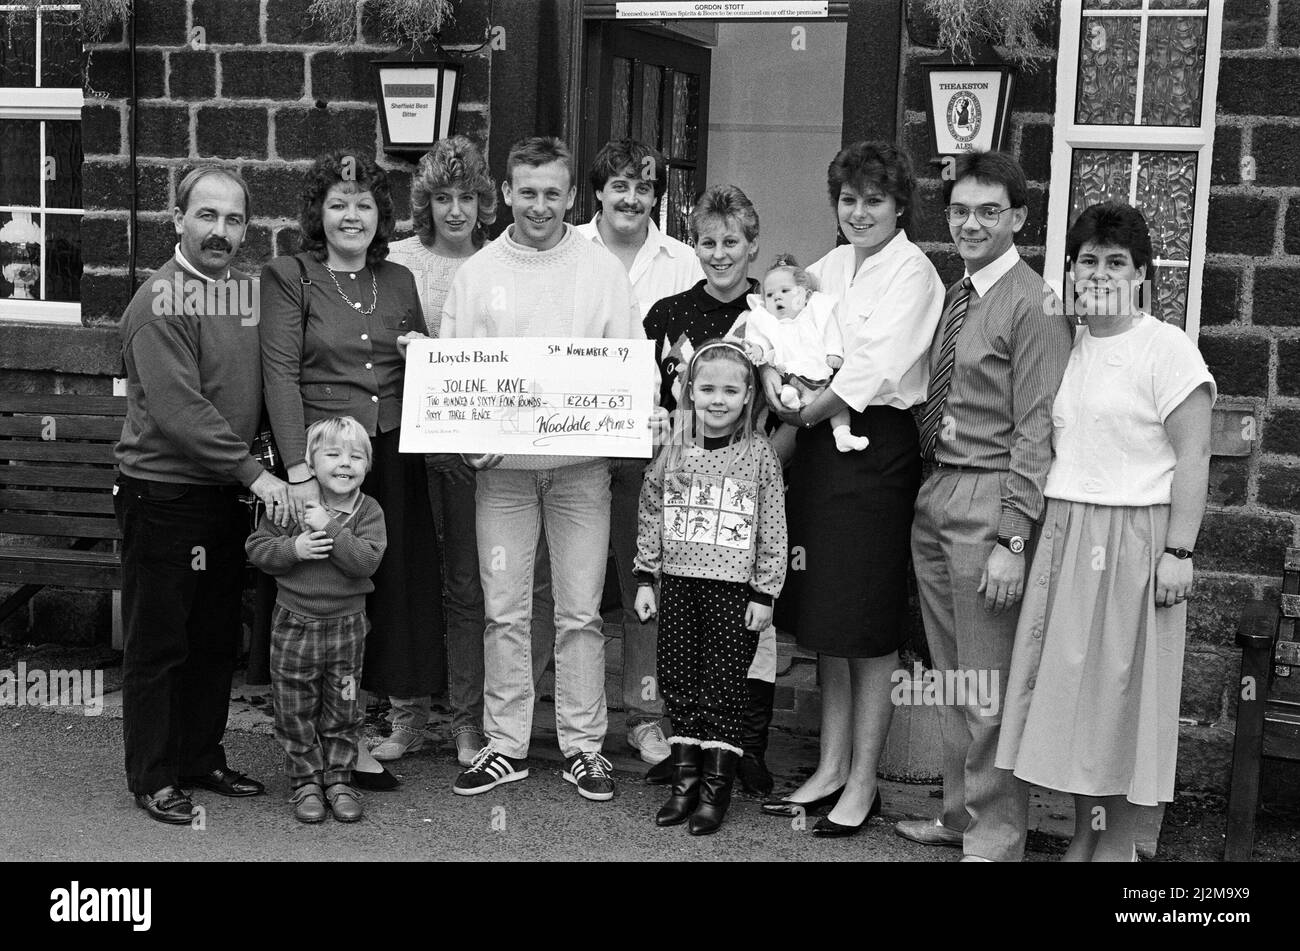 Huddersfield Town player Kieran O'Regan netted £264 for the Jolene Kaye Appeal when he collected a cheque from kind-hearted regulars of the Wooldale Arms. They raised the cash from raffles and donations. He is pictured receiving the cheque from fund-raising committee organiser Tricia Cooper (third right) who is seen holding baby Jolene. 5th November 1989. Stock Photo